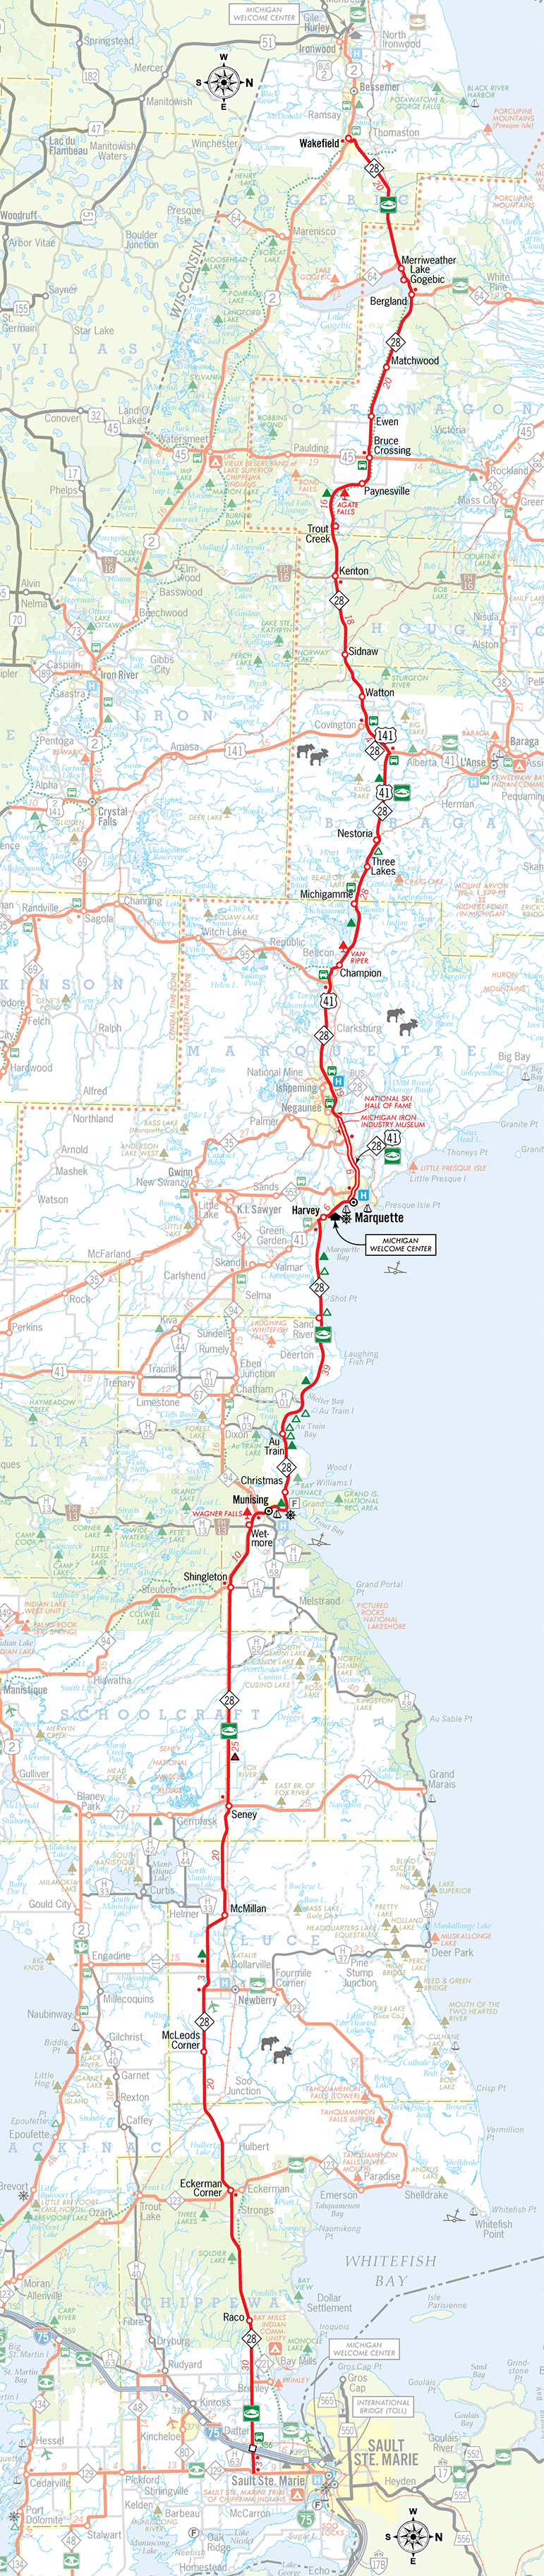 M-28 Route Map